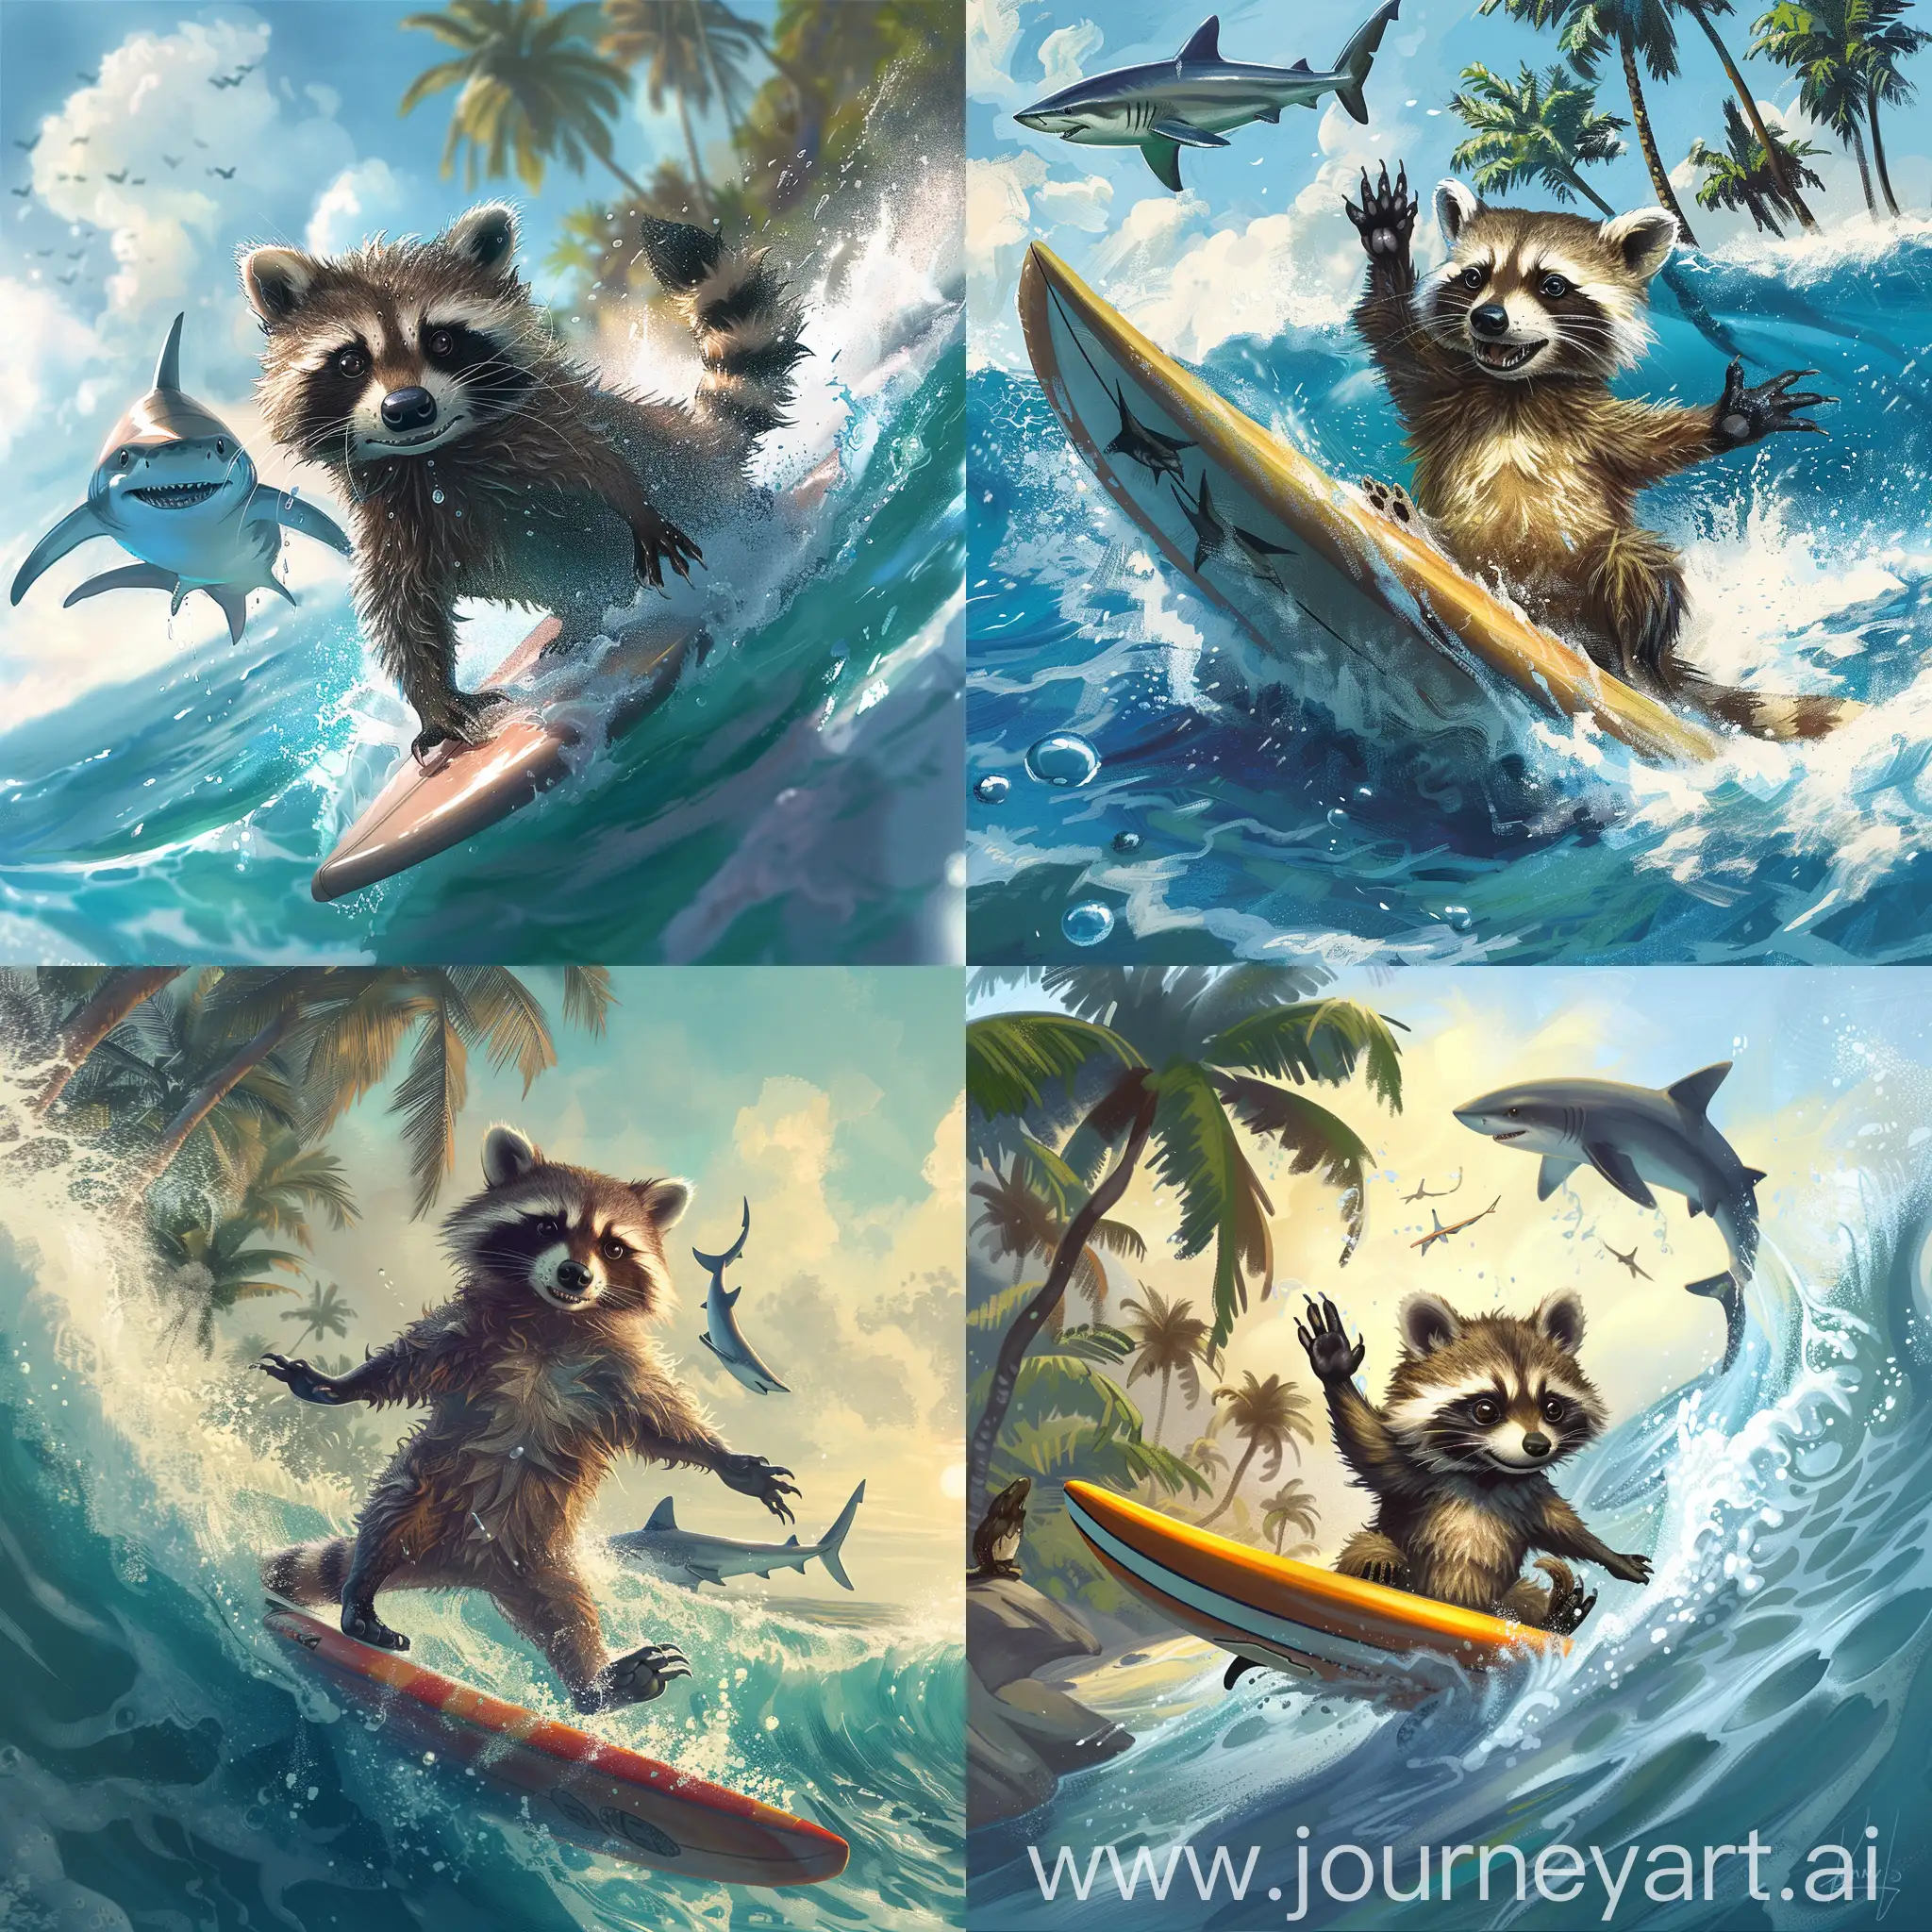 Raccoon-Surfing-with-Shark-and-Palm-Trees-in-Ocean